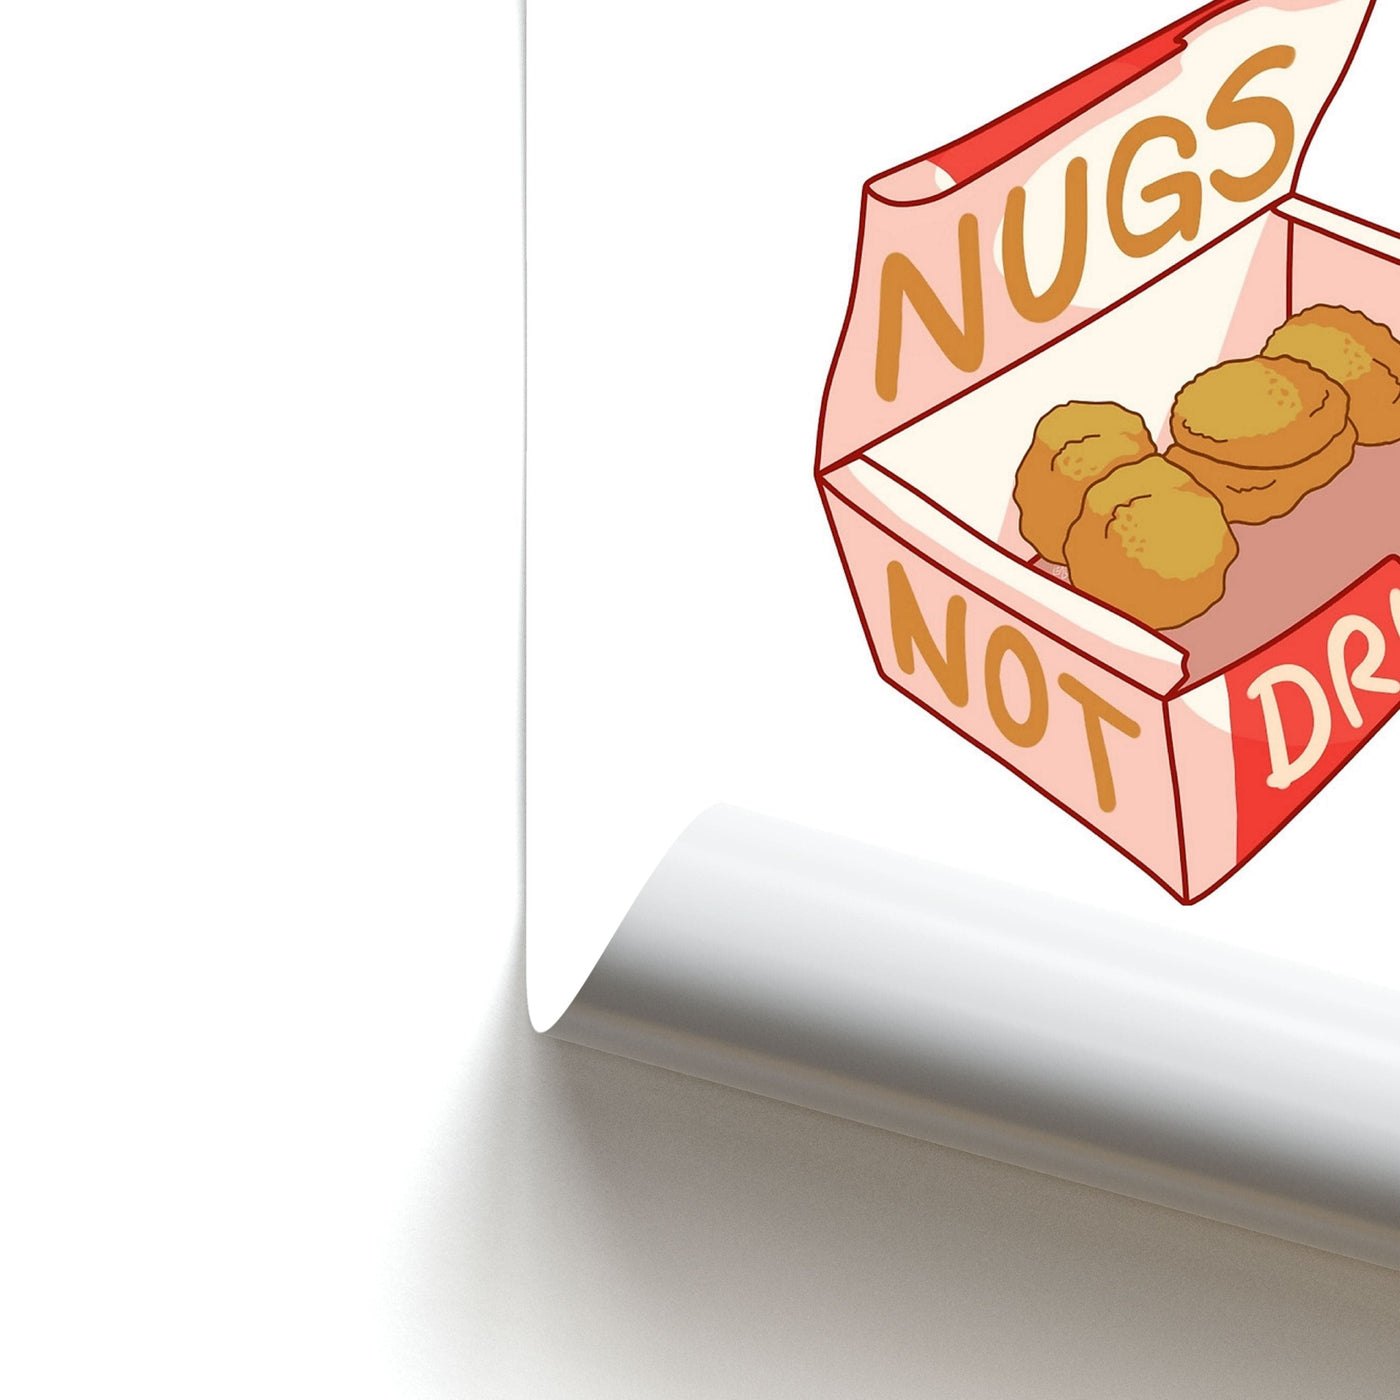 Nugs not Drugs Tumblr Style Poster